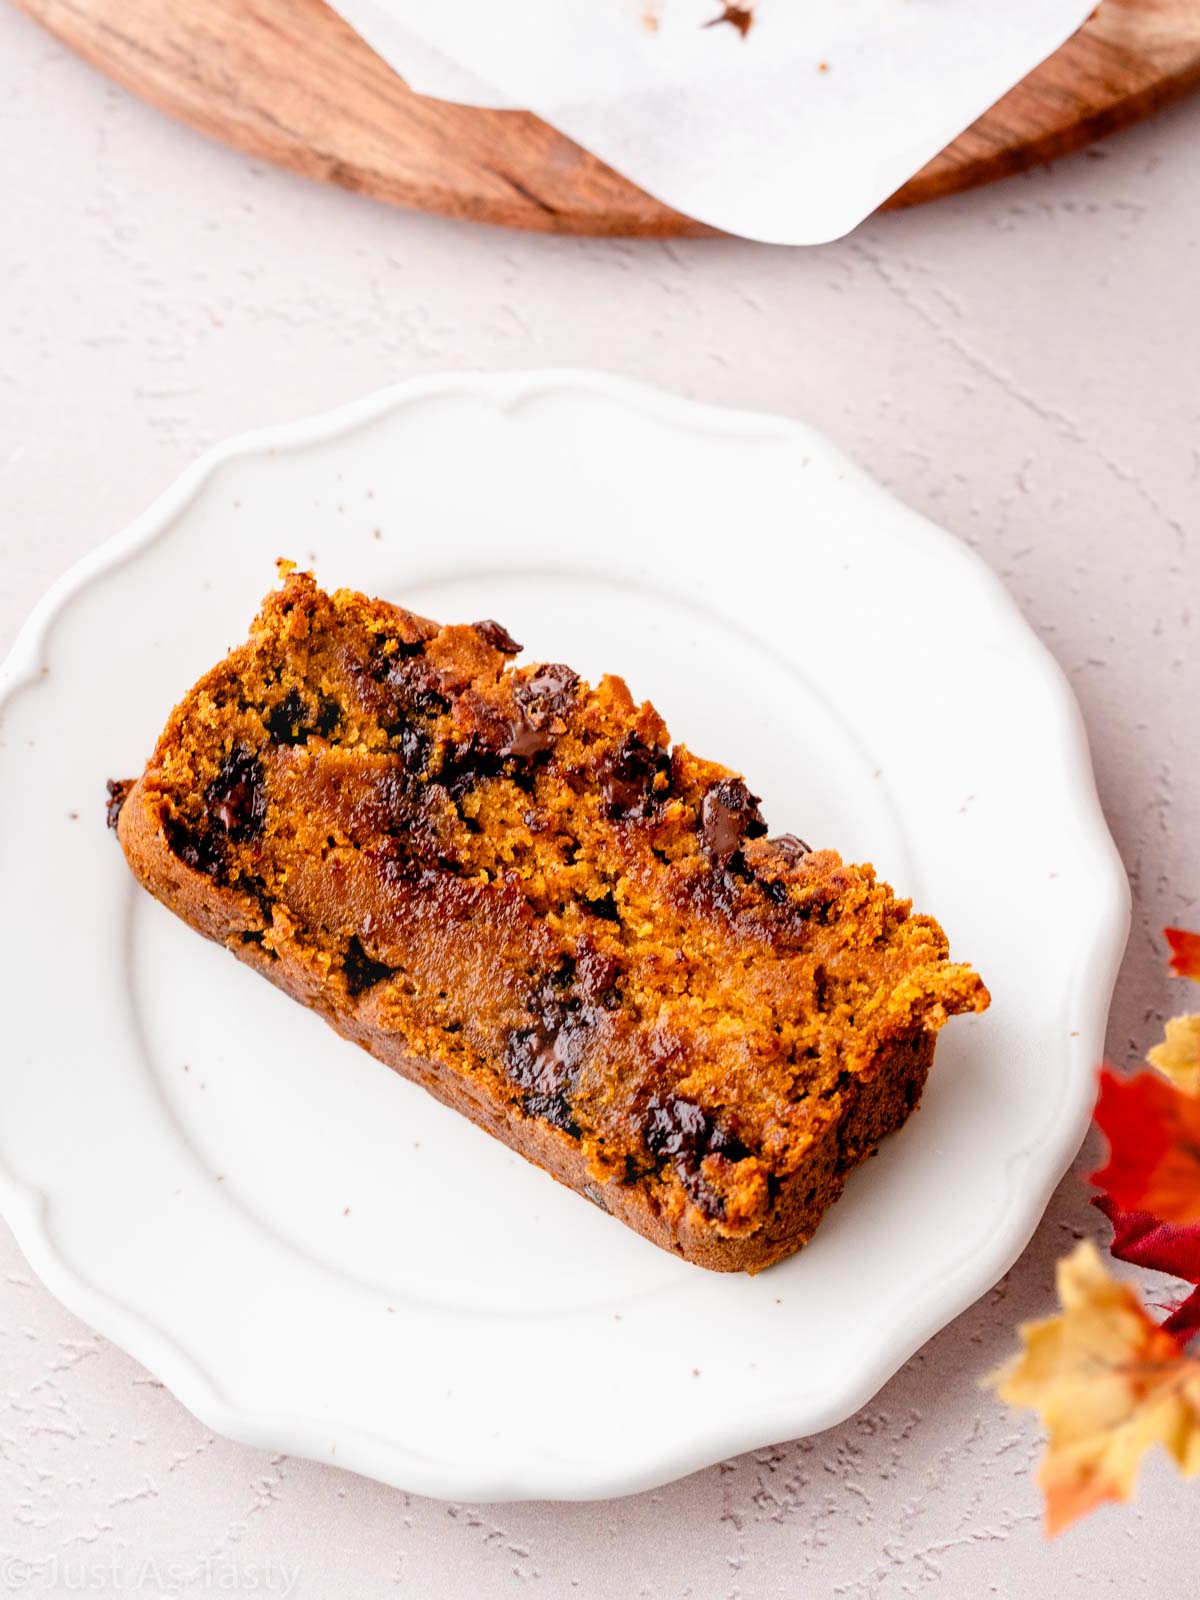 Slice of chocolate chip pumpkin bread on a plate.